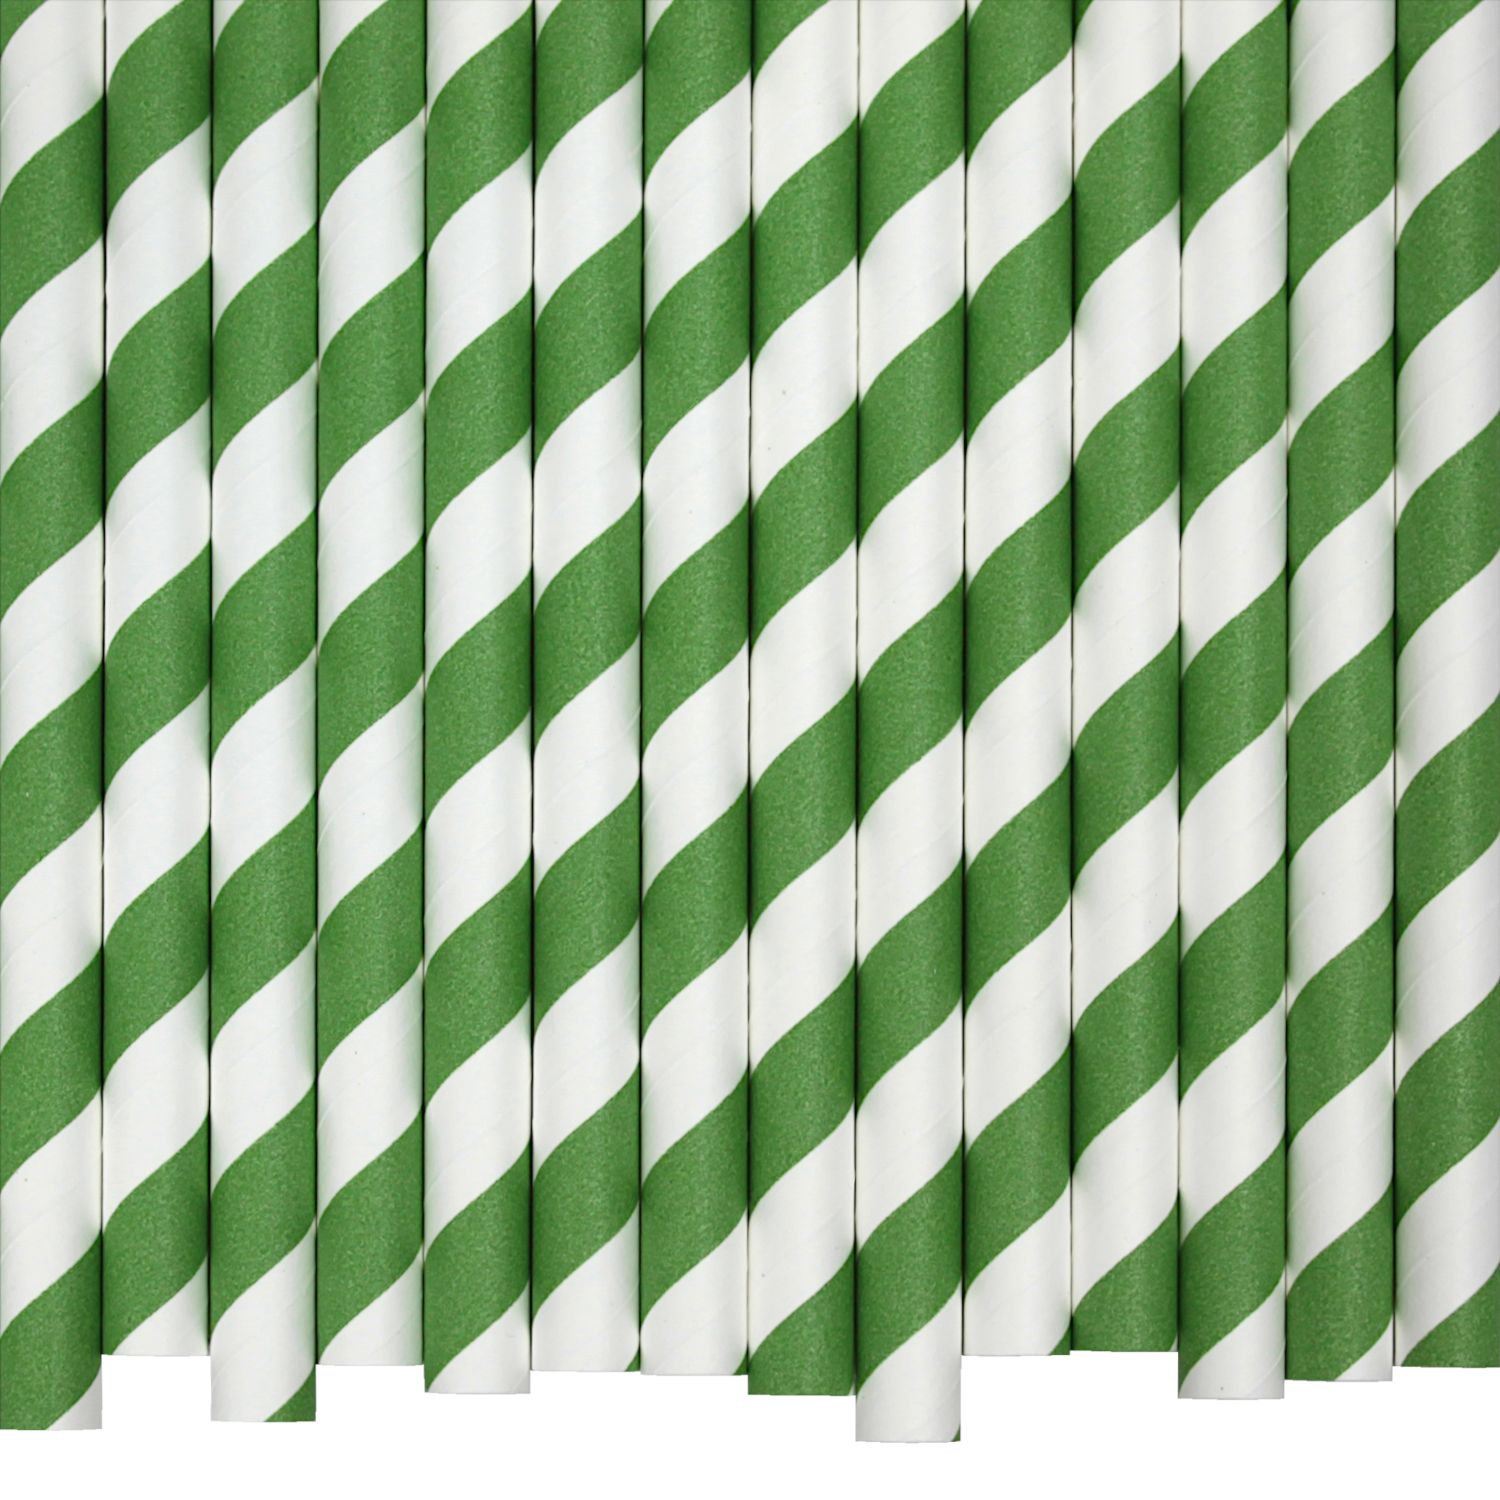 Green & White Striped Paper Straws (10mm x 200mm) - Quality Drinking Straws for Smoothies and Milkshakes - Intrinsic Paper Straws